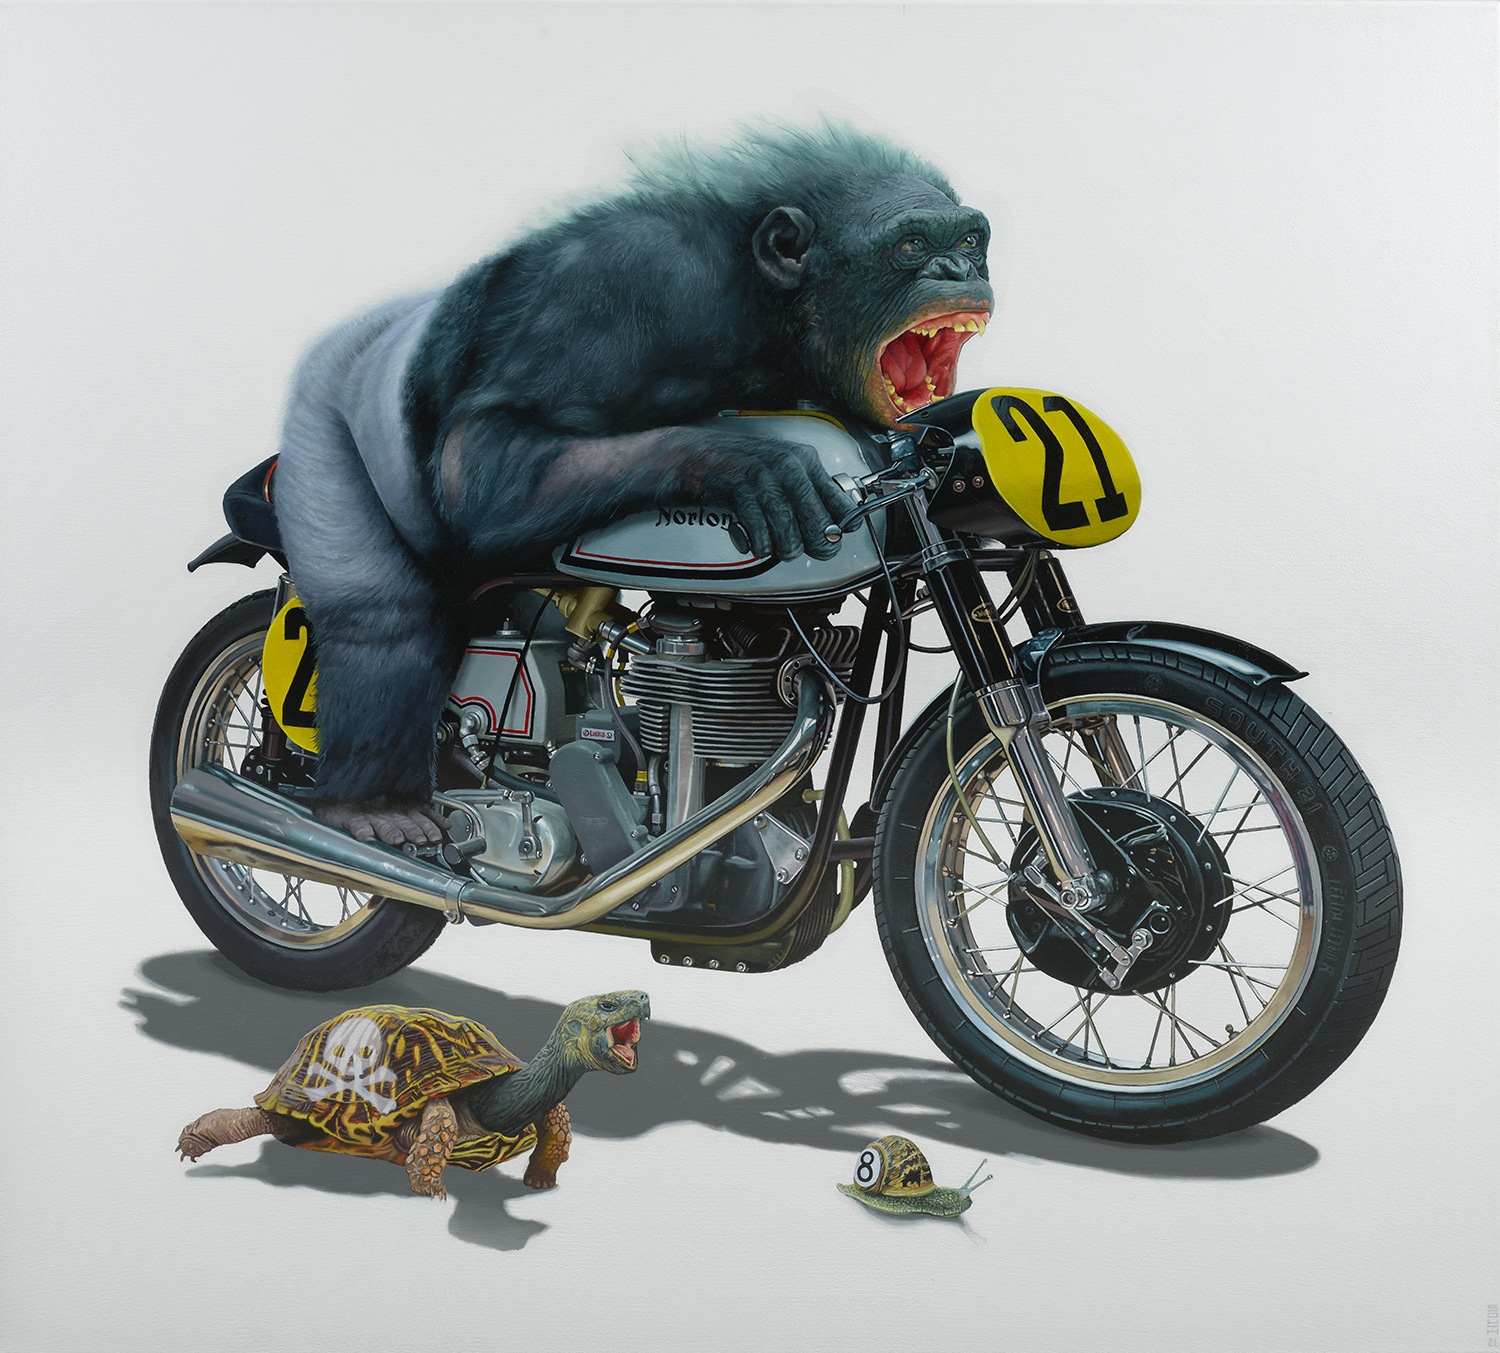 A monkey on a motorcycle racing a turtle and snail - Tony South - The Last Lap